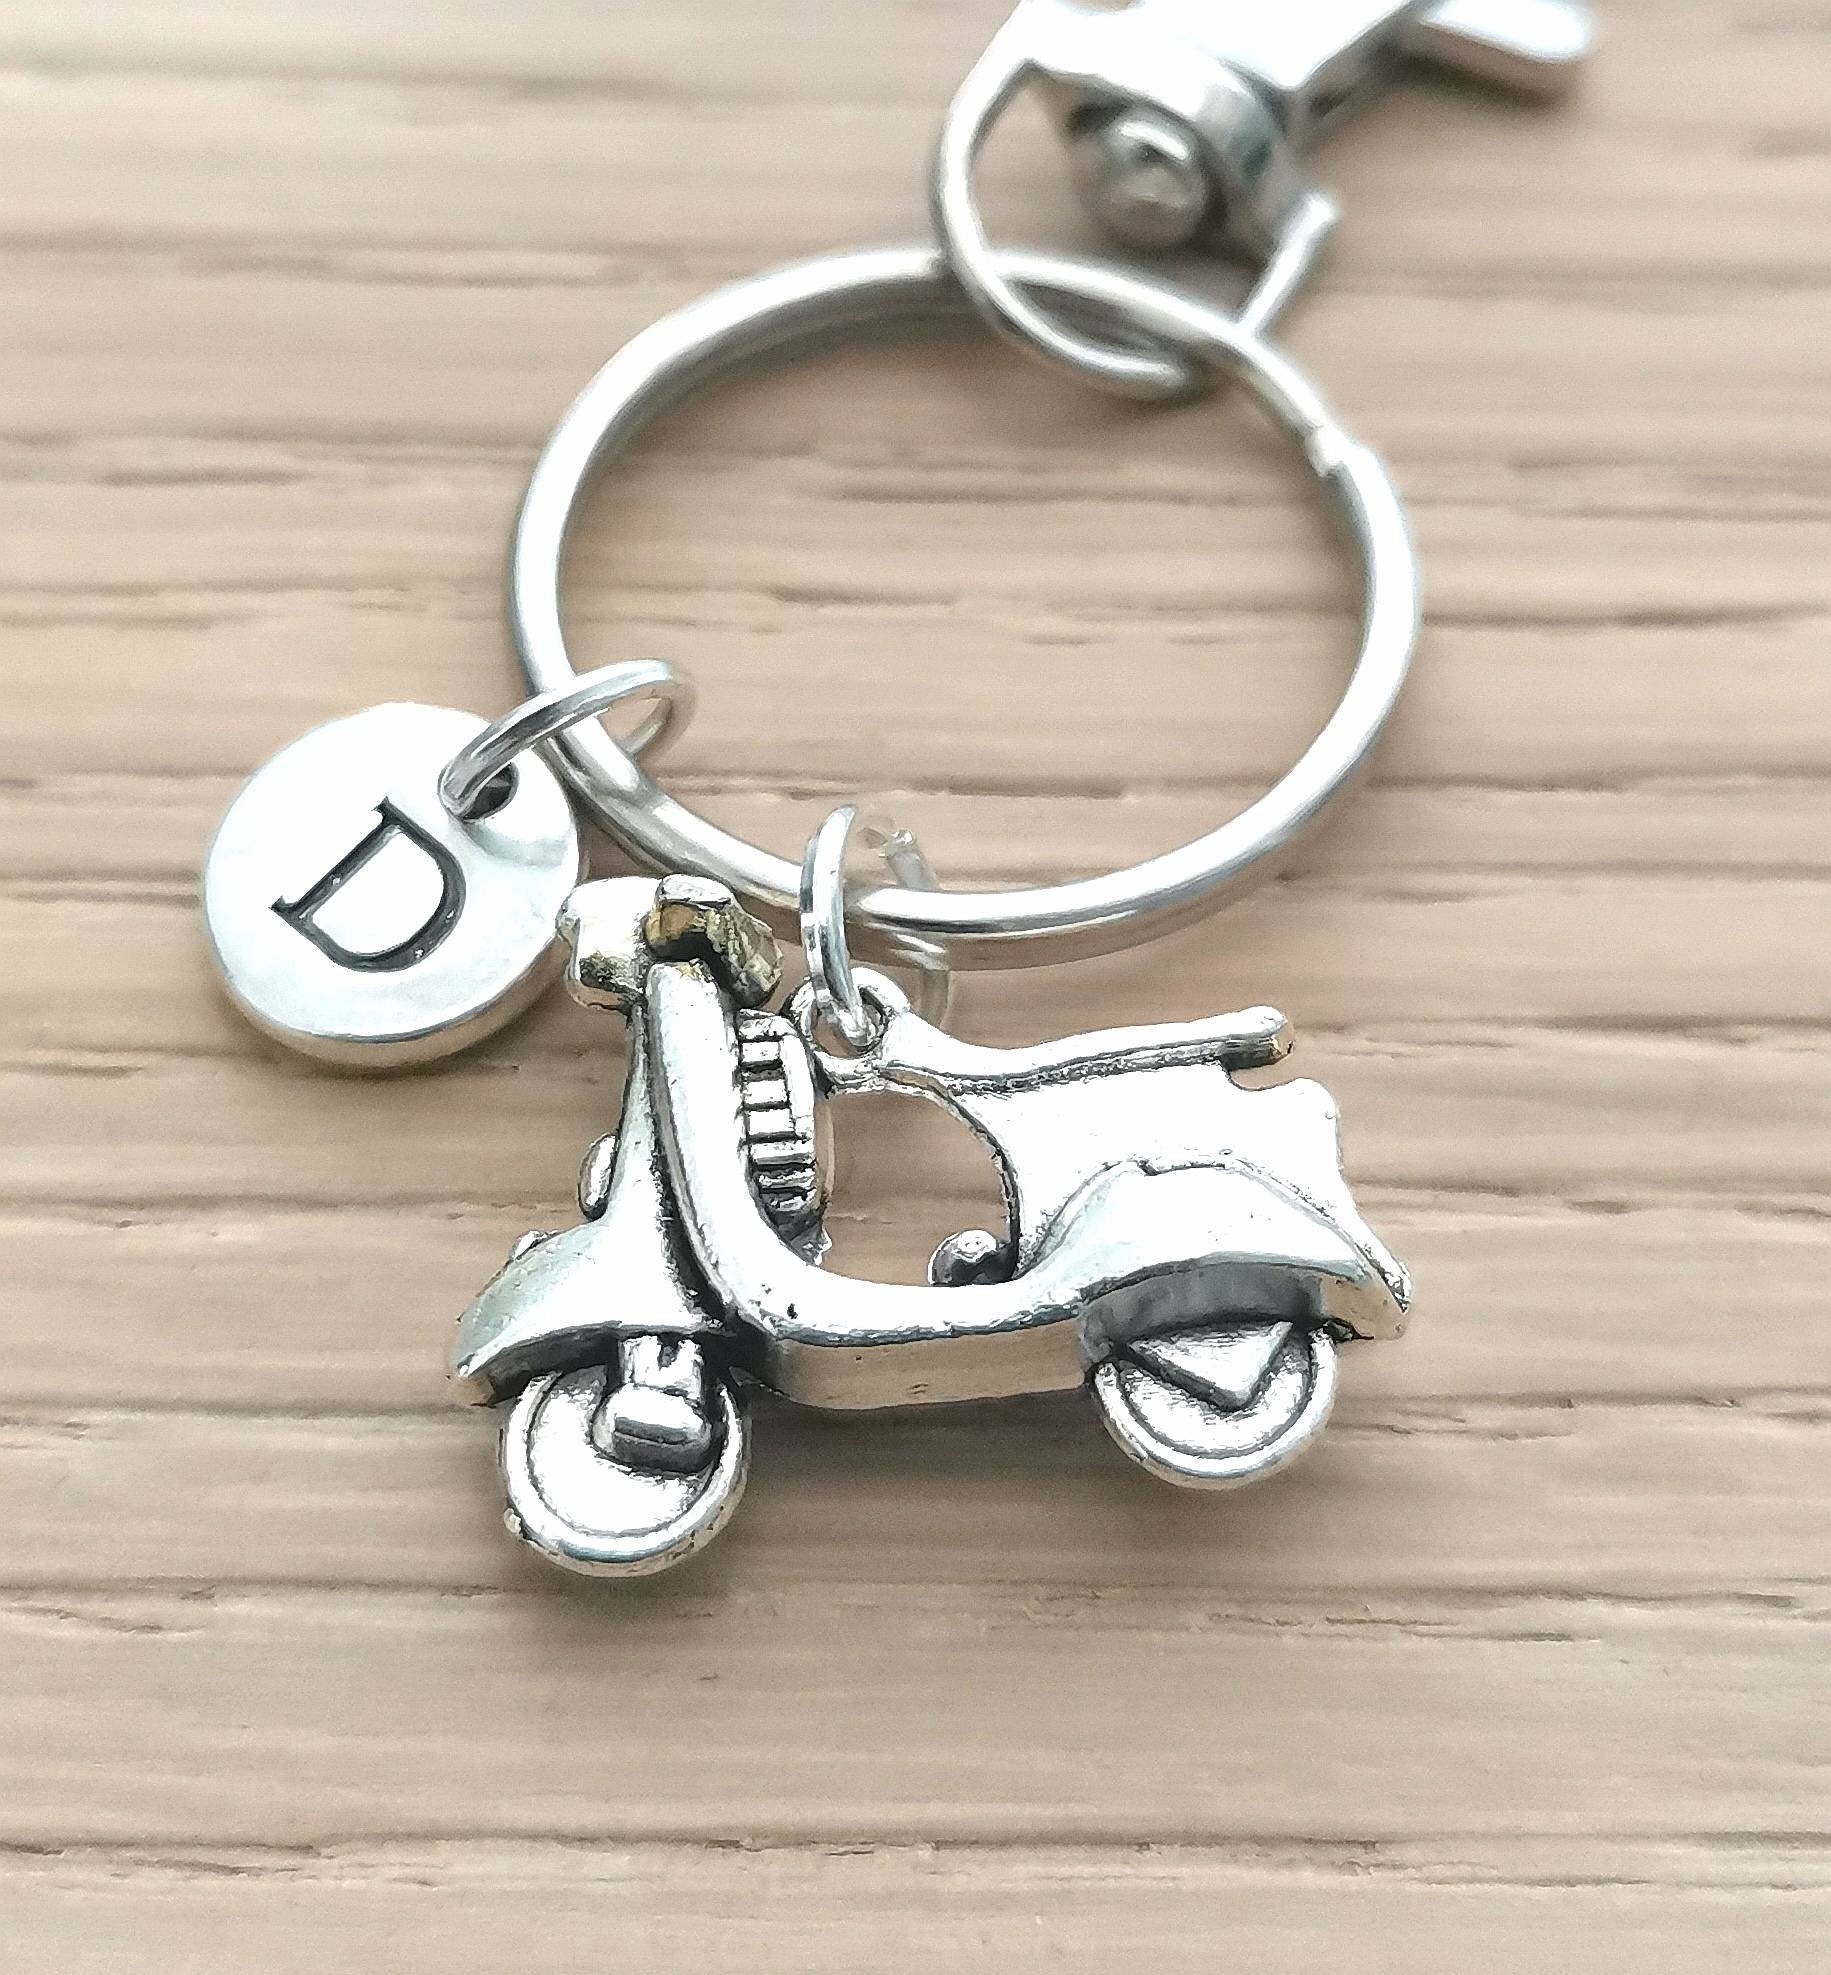 Scooter Keychain, Scooter Keyring, Moped Keychain, Moped Gift, Moped Keyring, Moped Driver, Scooter Owner, Italy, France, Motorbike, Cool